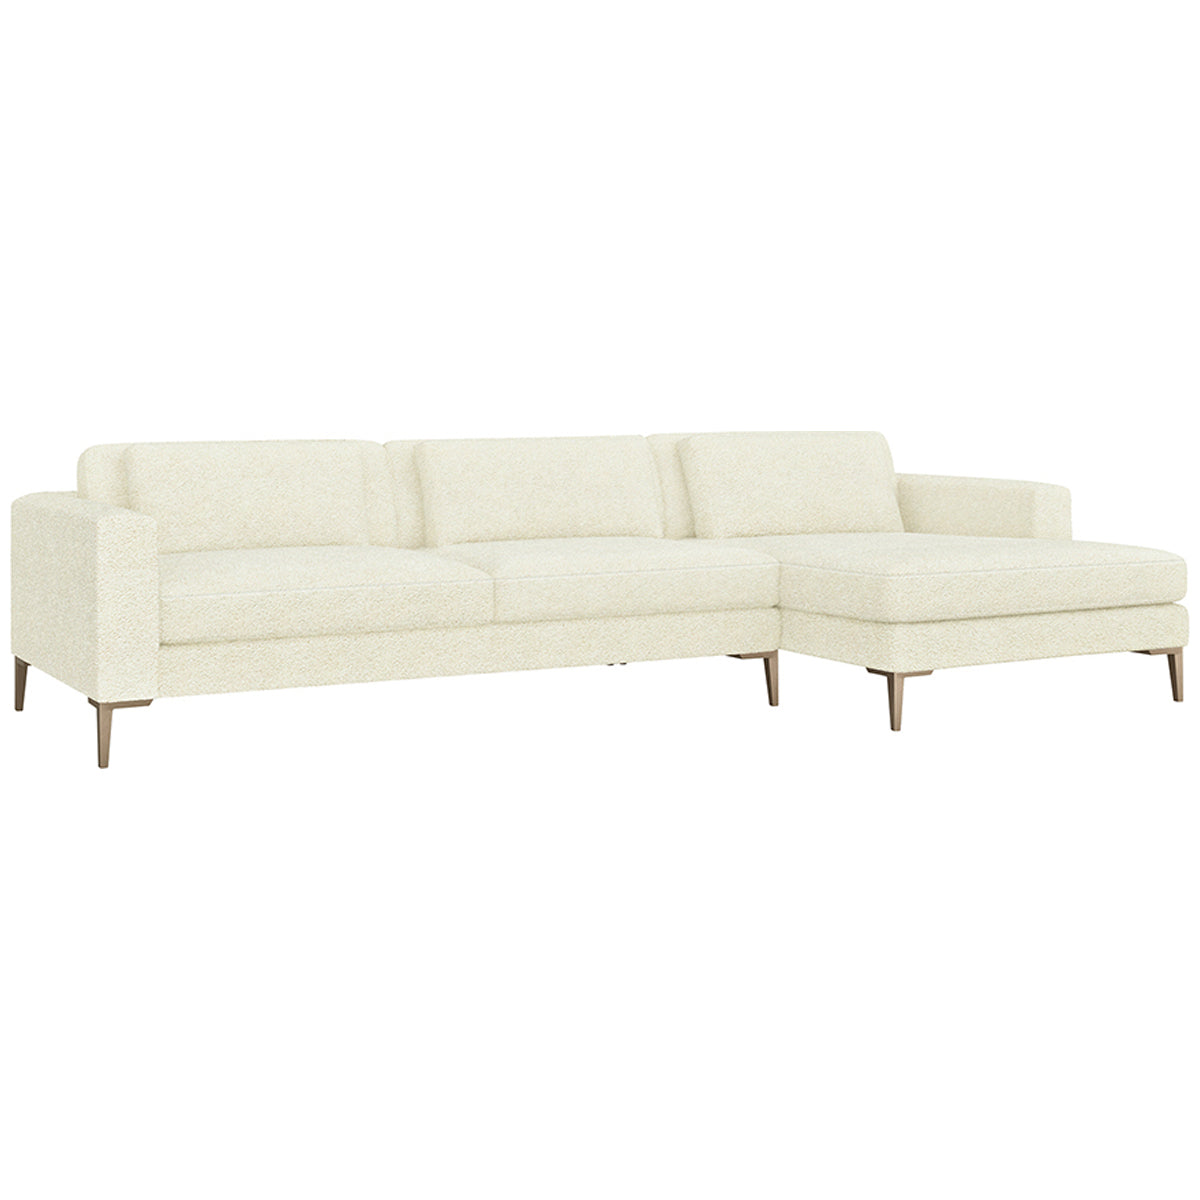 Interlude Home Izzy 2-Piece Sectional - Down